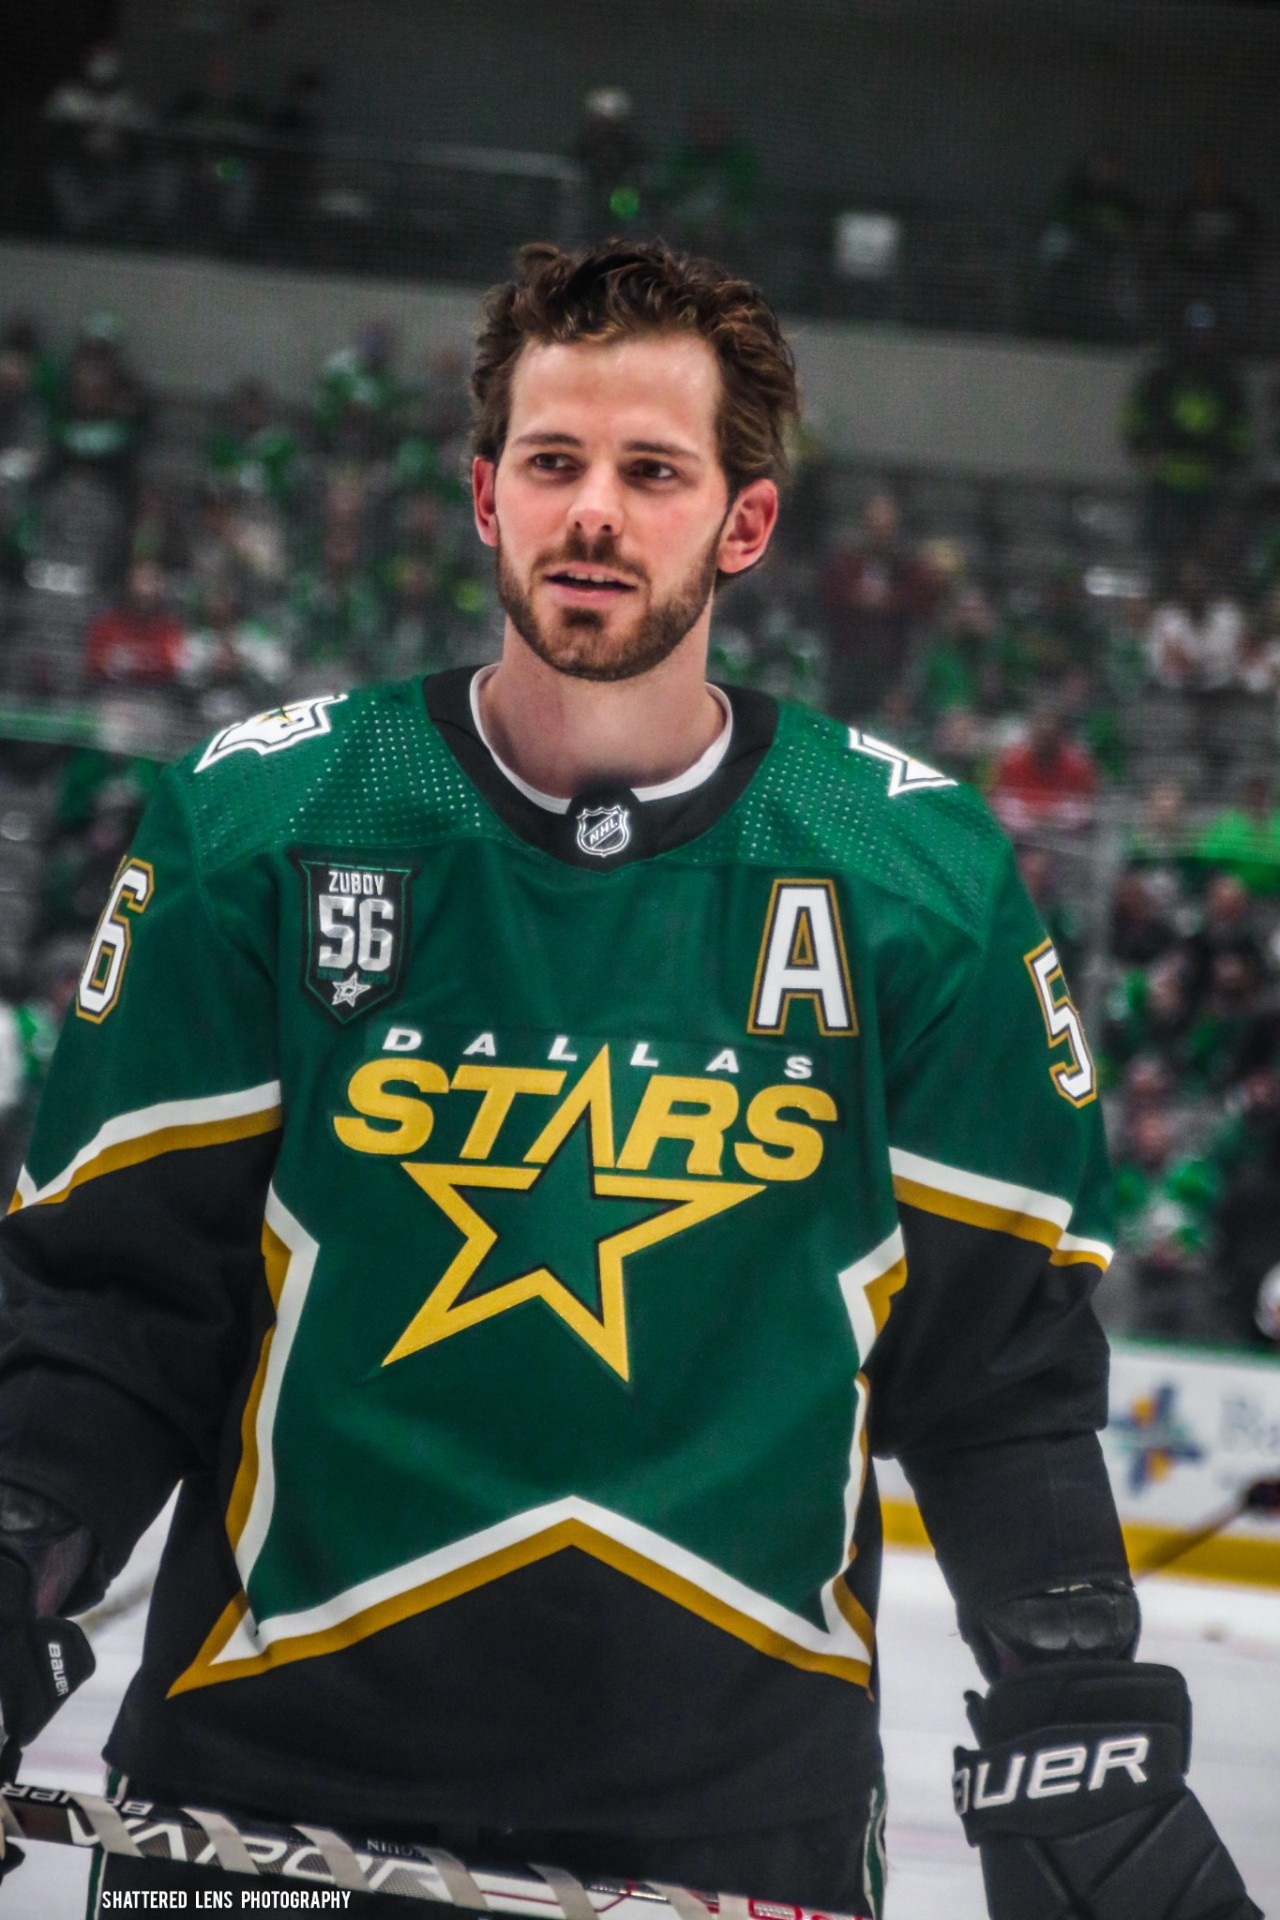 Zuuuuub! Check out these incredible photos from Sergei Zubov's Dallas Stars  jersey retirement